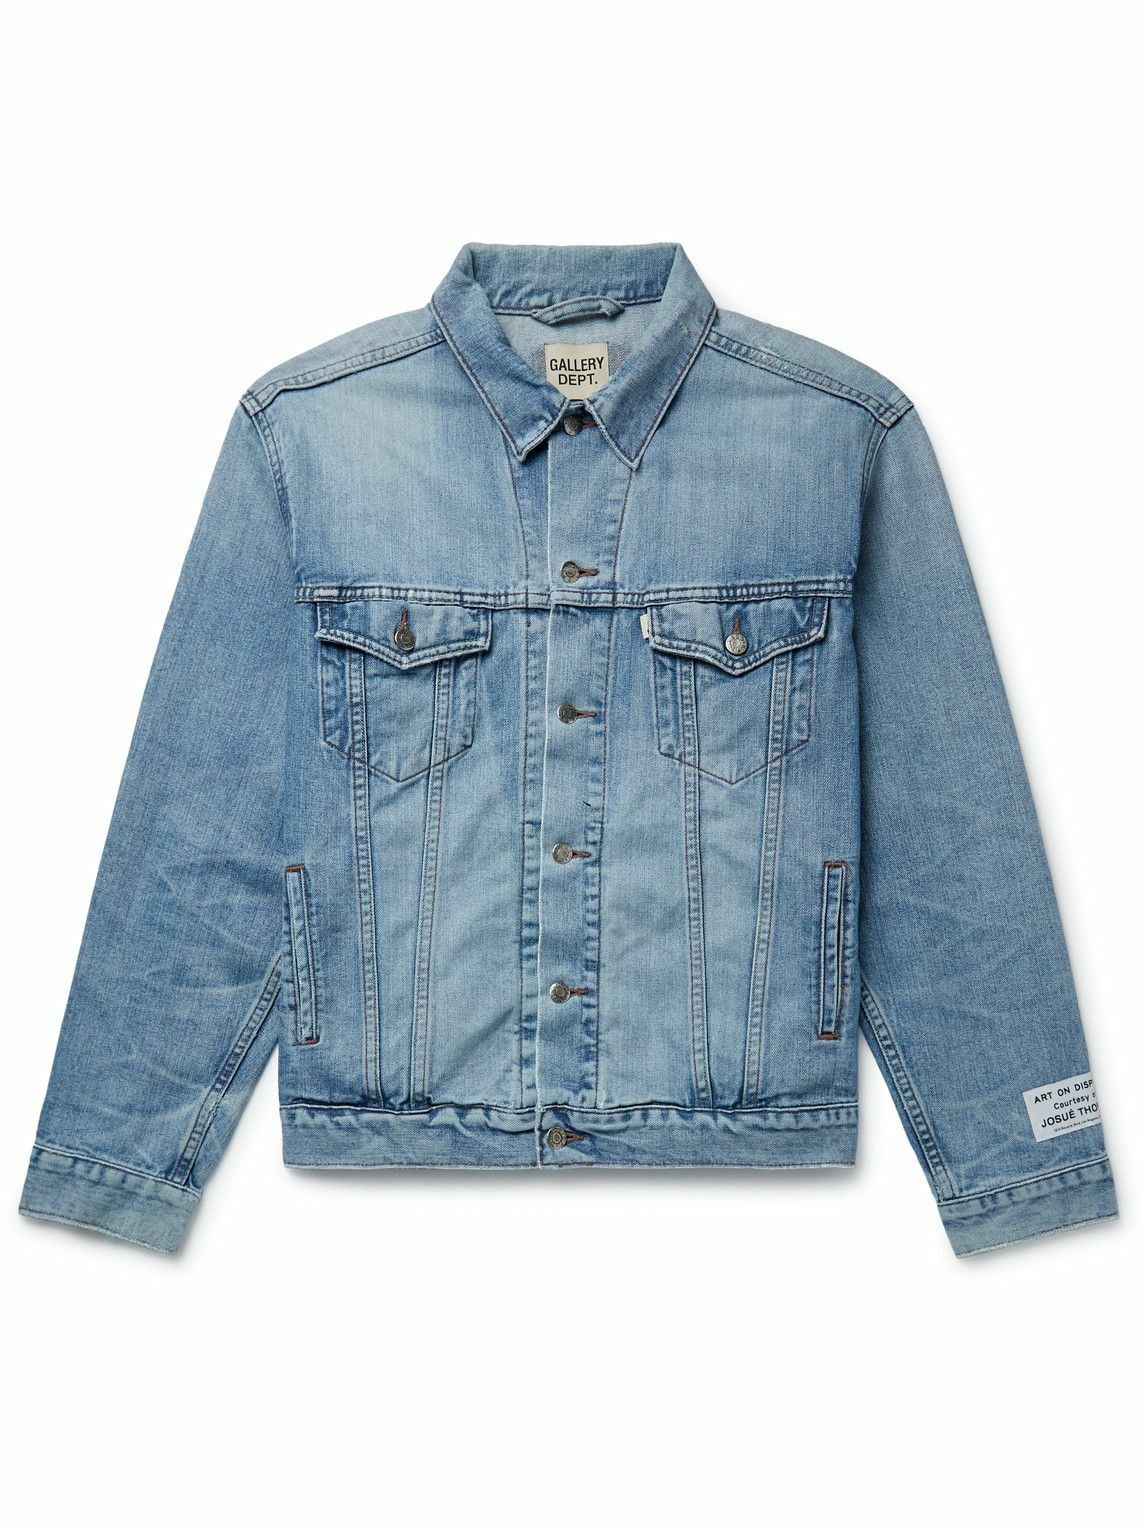 Gallery Dept. - Andy Logo-Embroidered Denim Jacket - Blue Gallery